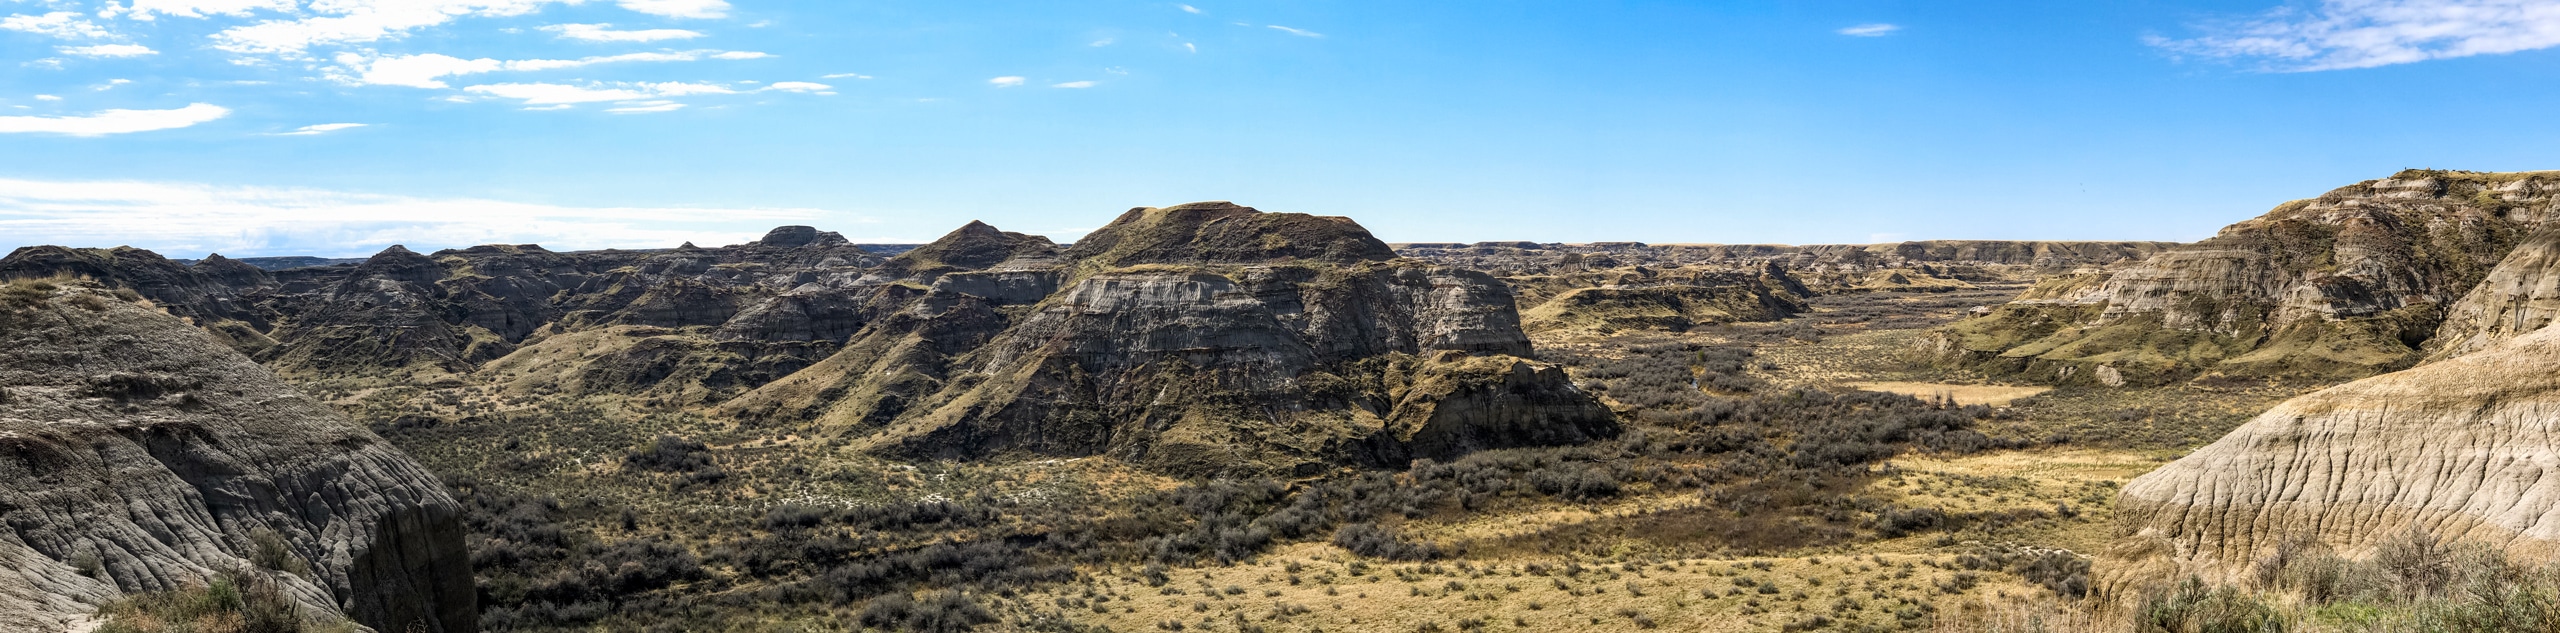 Coulee Viewpoint Trail